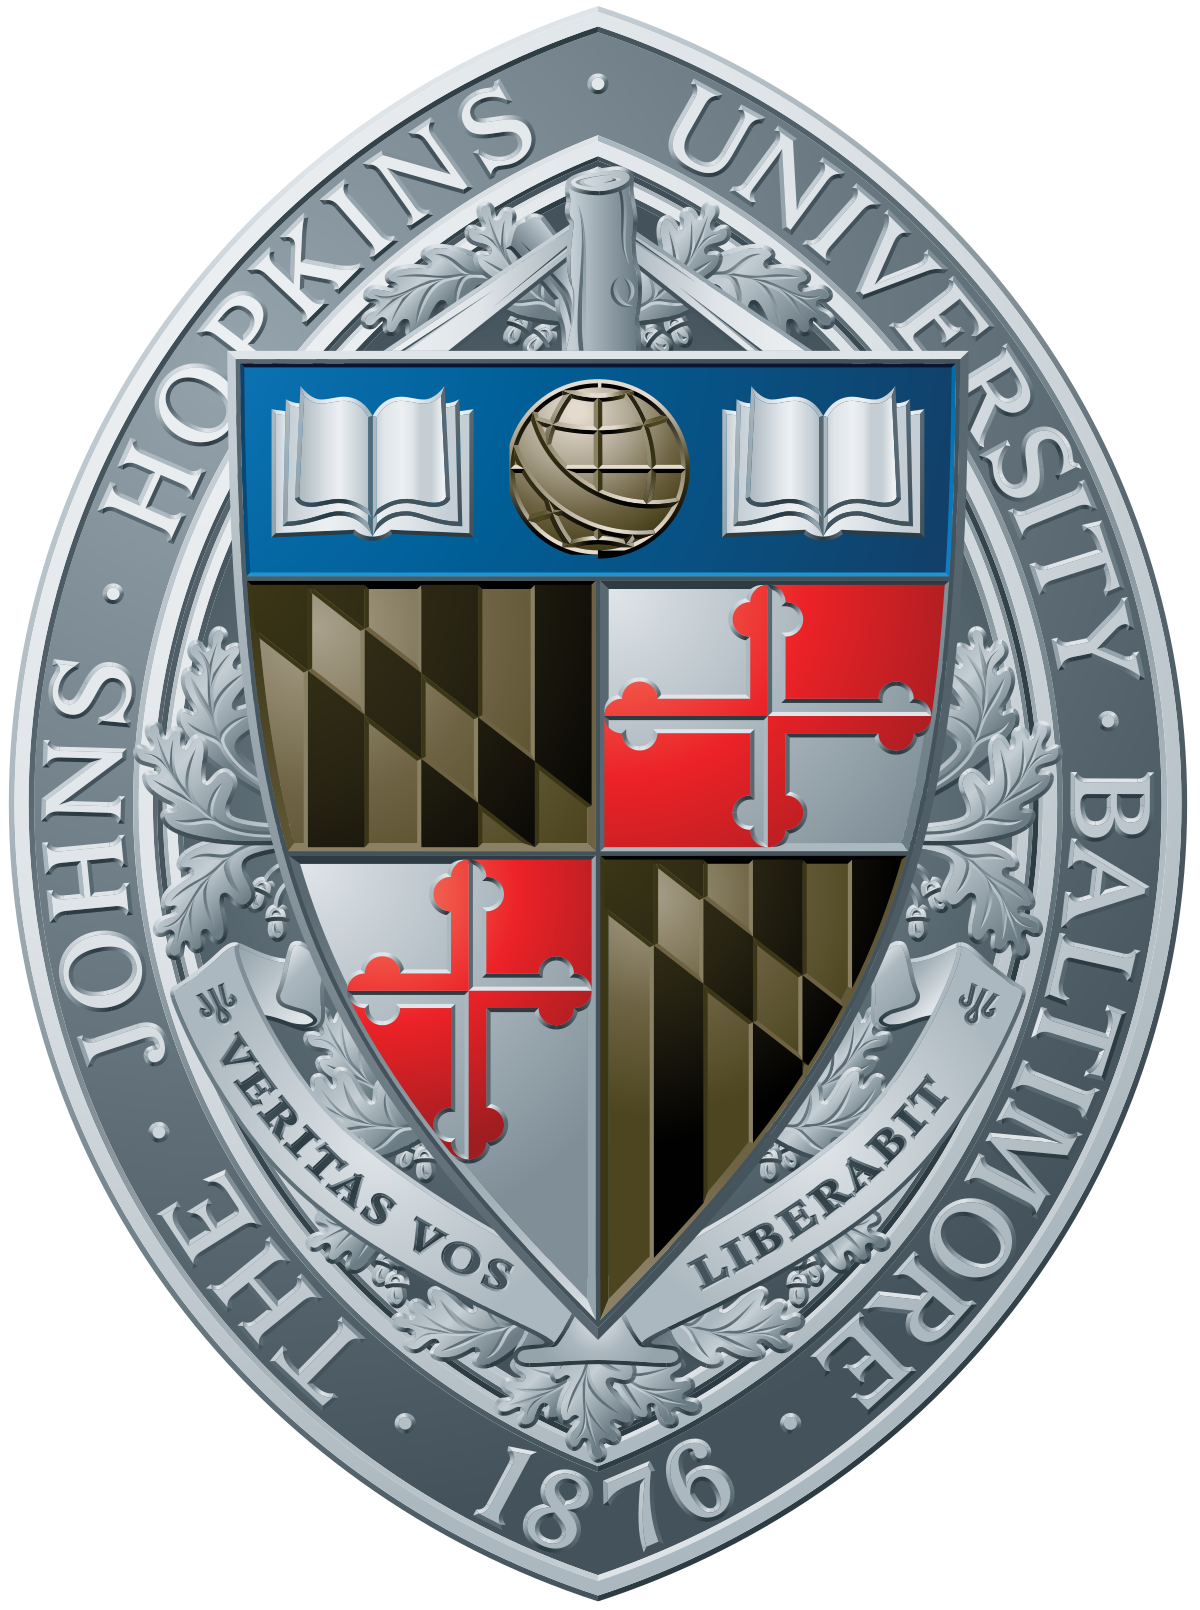 A logo of Johns Hopkins University for our school profile